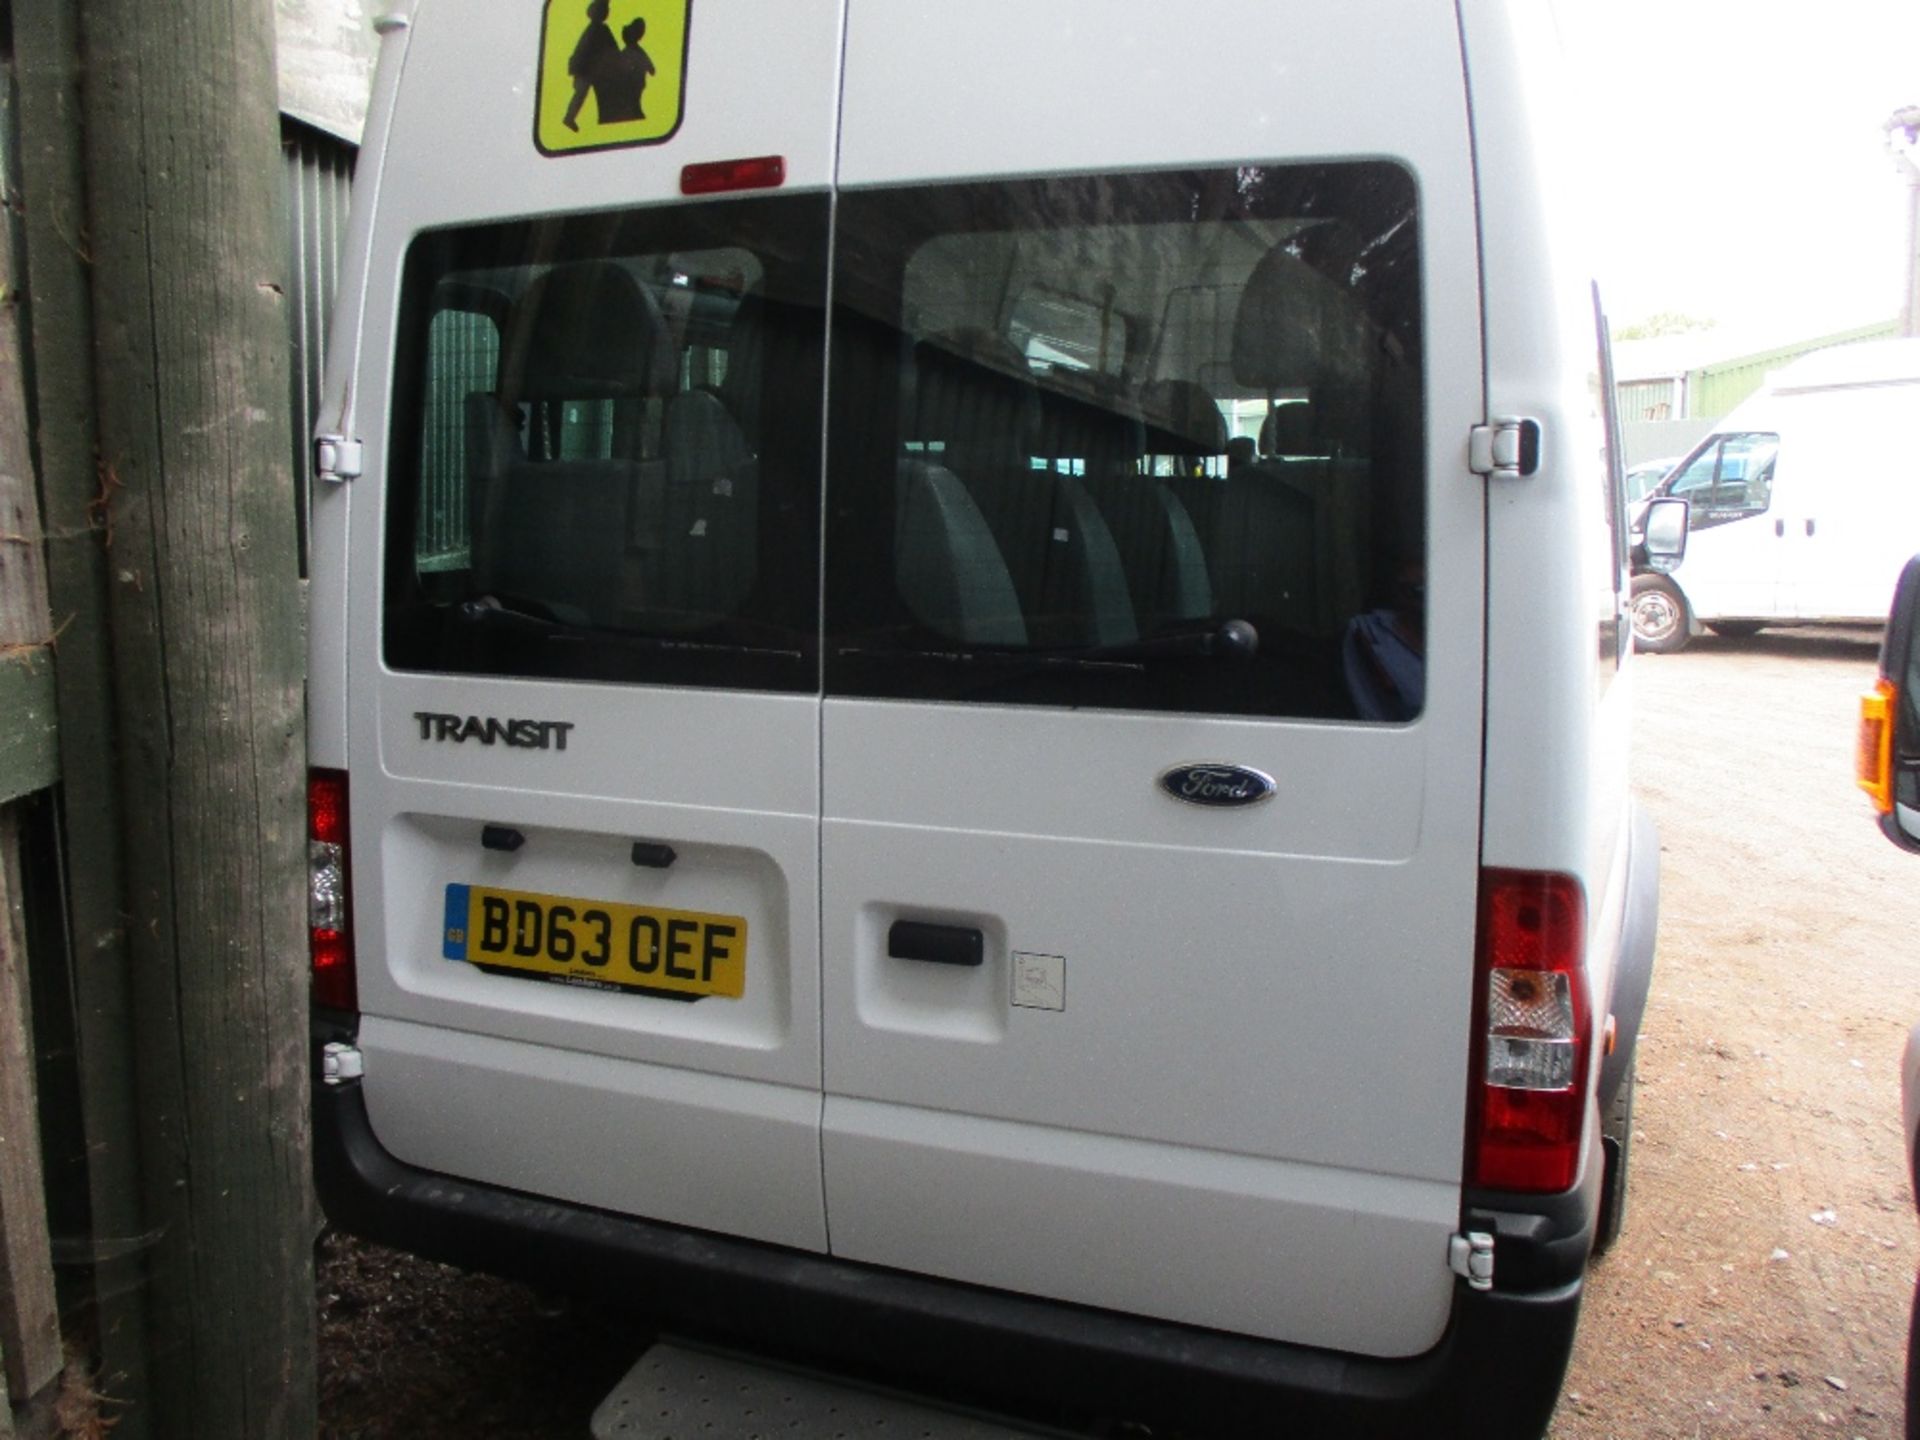 Ford Transit mini bus, 17 seats in total, REG:BD63 OEF previously damaged and repaired, 34,680rec. - Image 5 of 7